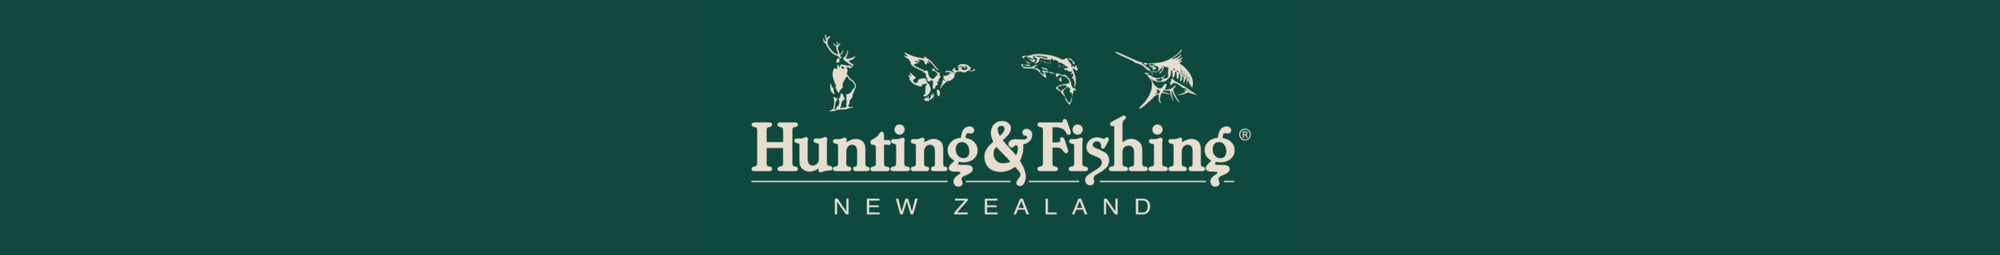 Hunting and Fishing Clothing - Hunters Element NZ